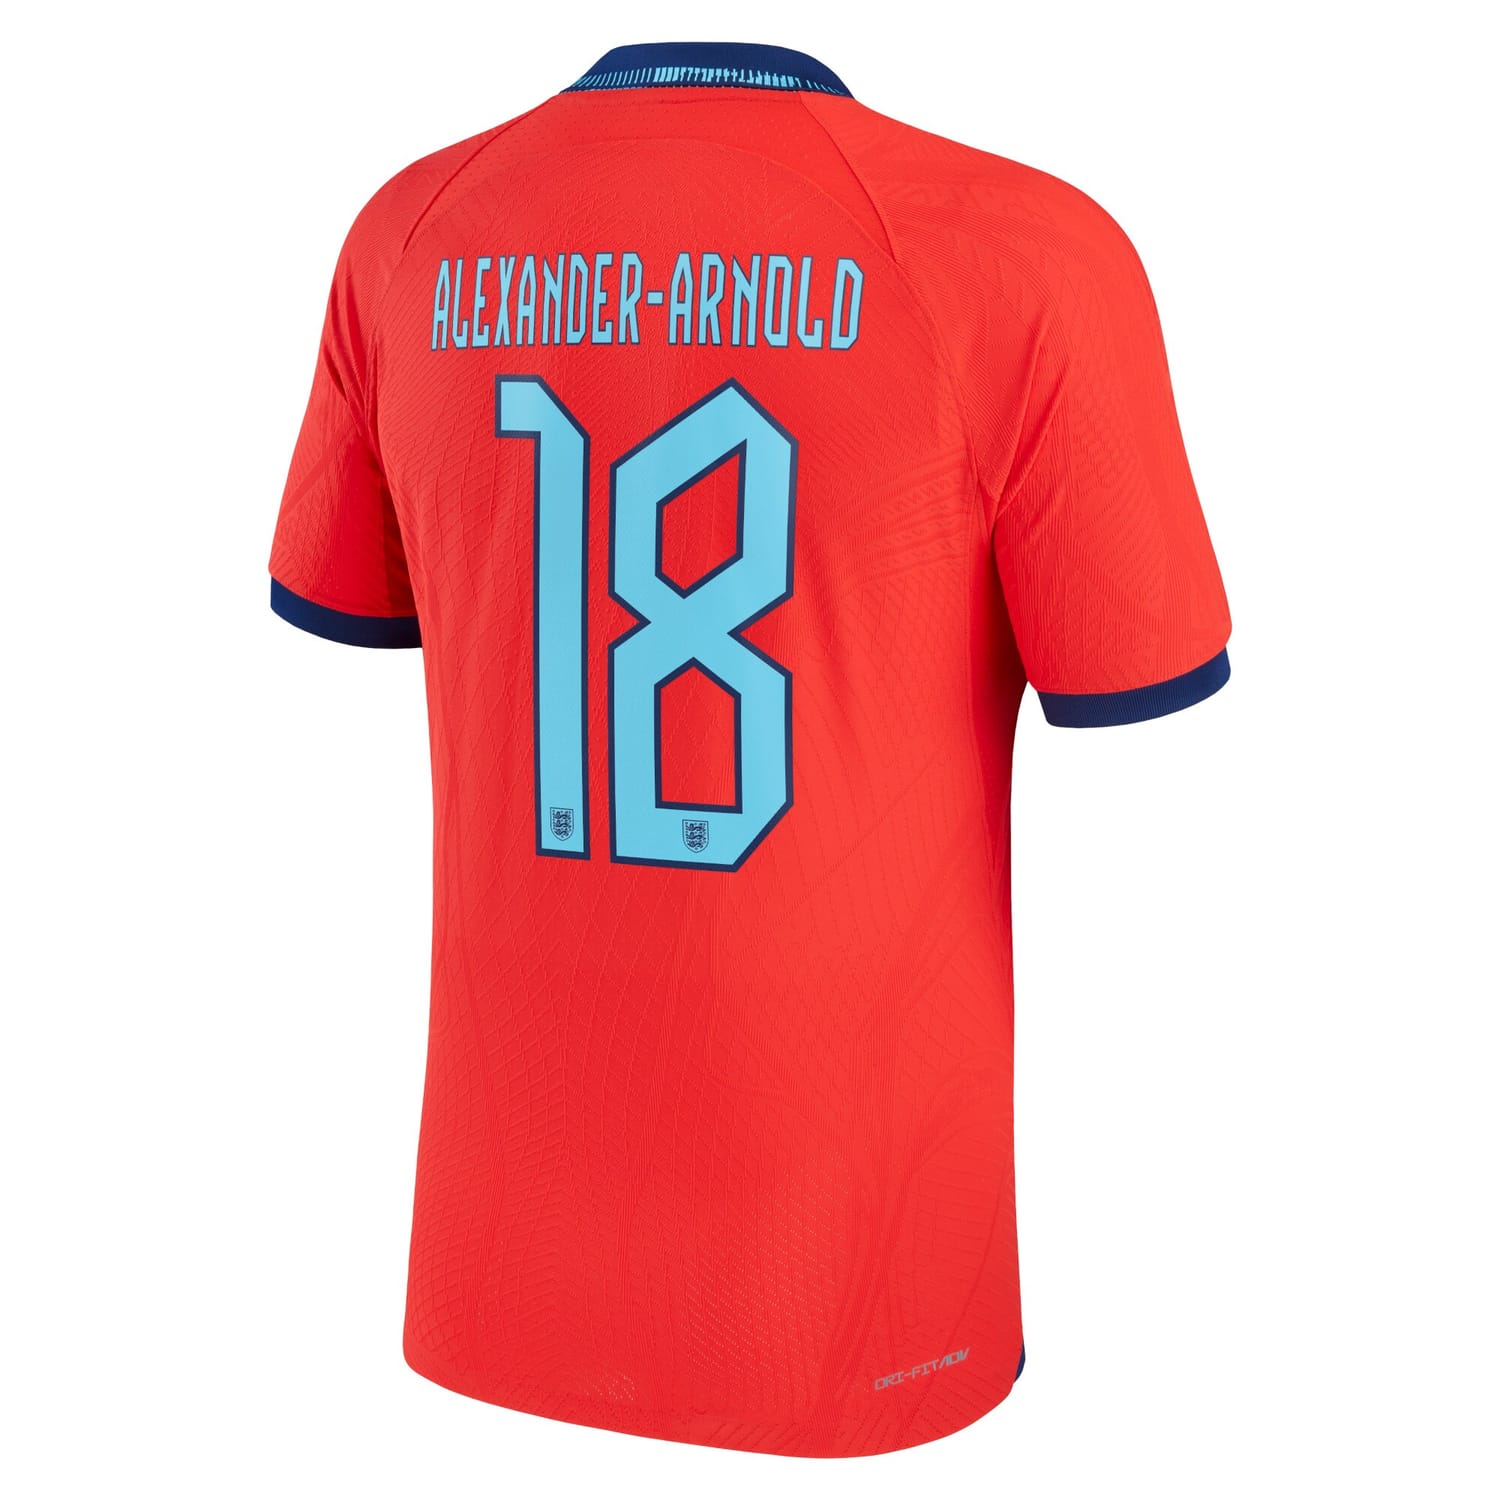 England National Team Away Authentic Jersey Shirt 2022 player Trent Alexander-Arnold 18 printing for Men